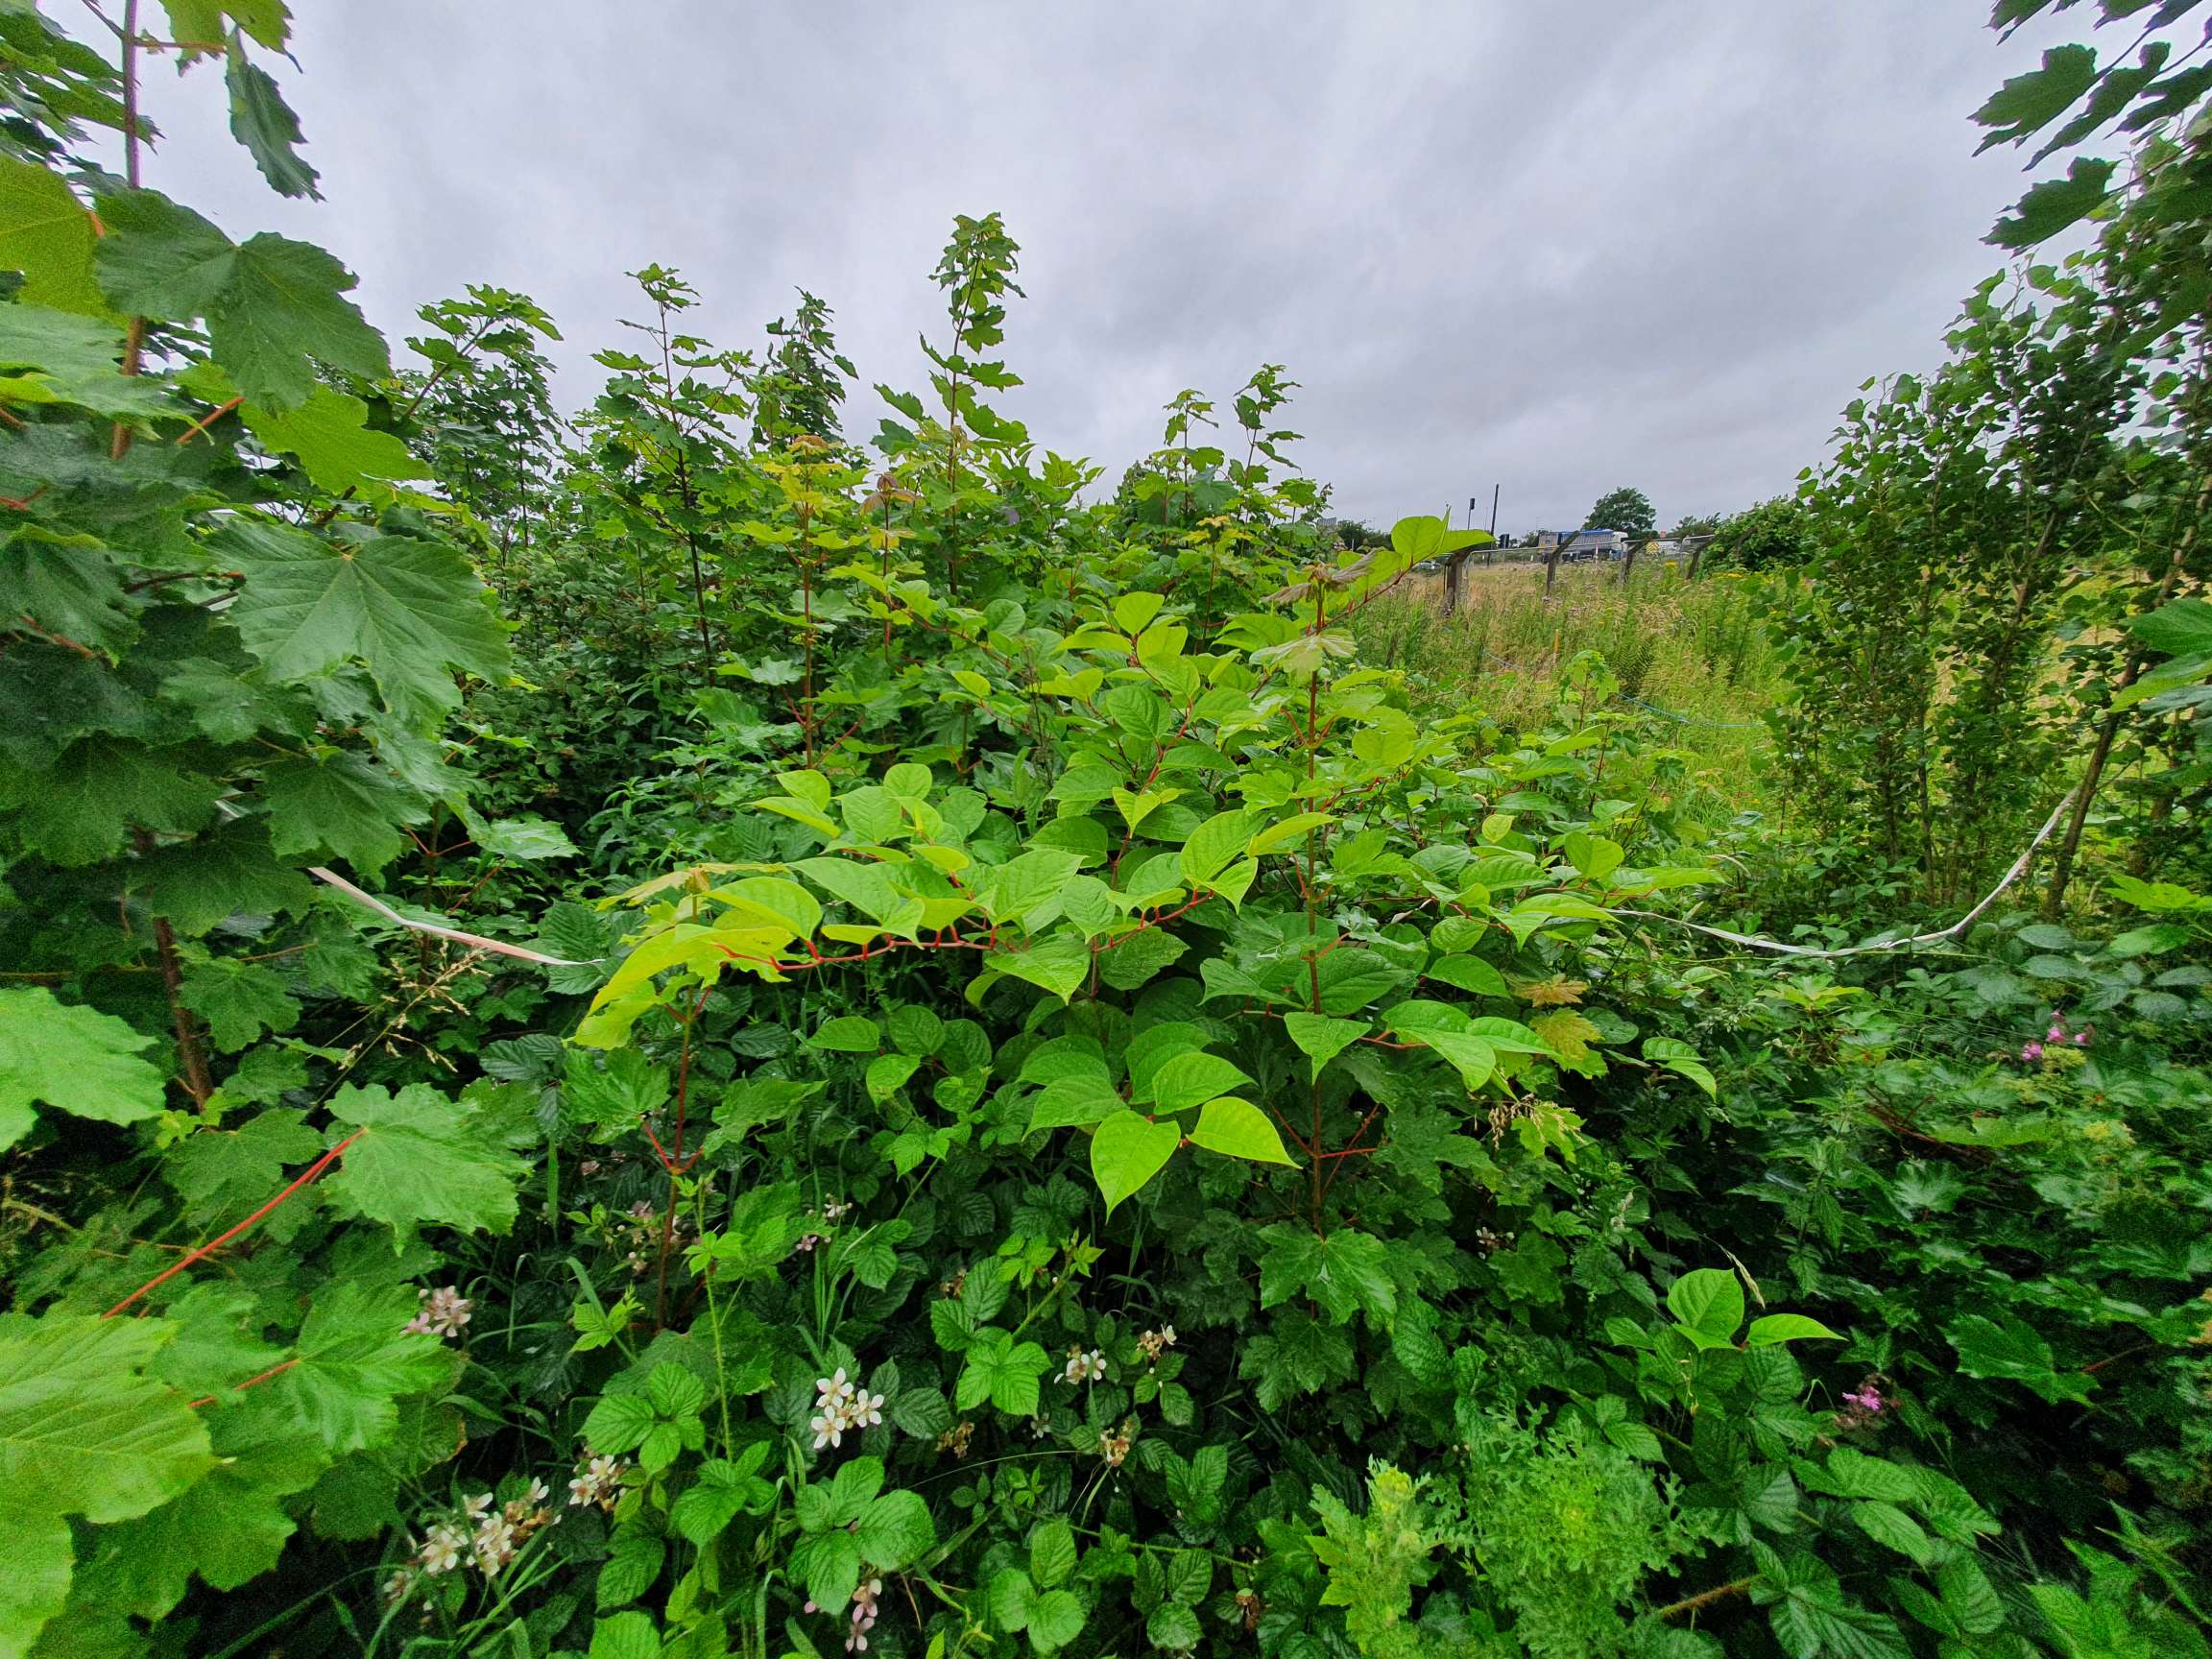 Japanese knotweed growing on open ground